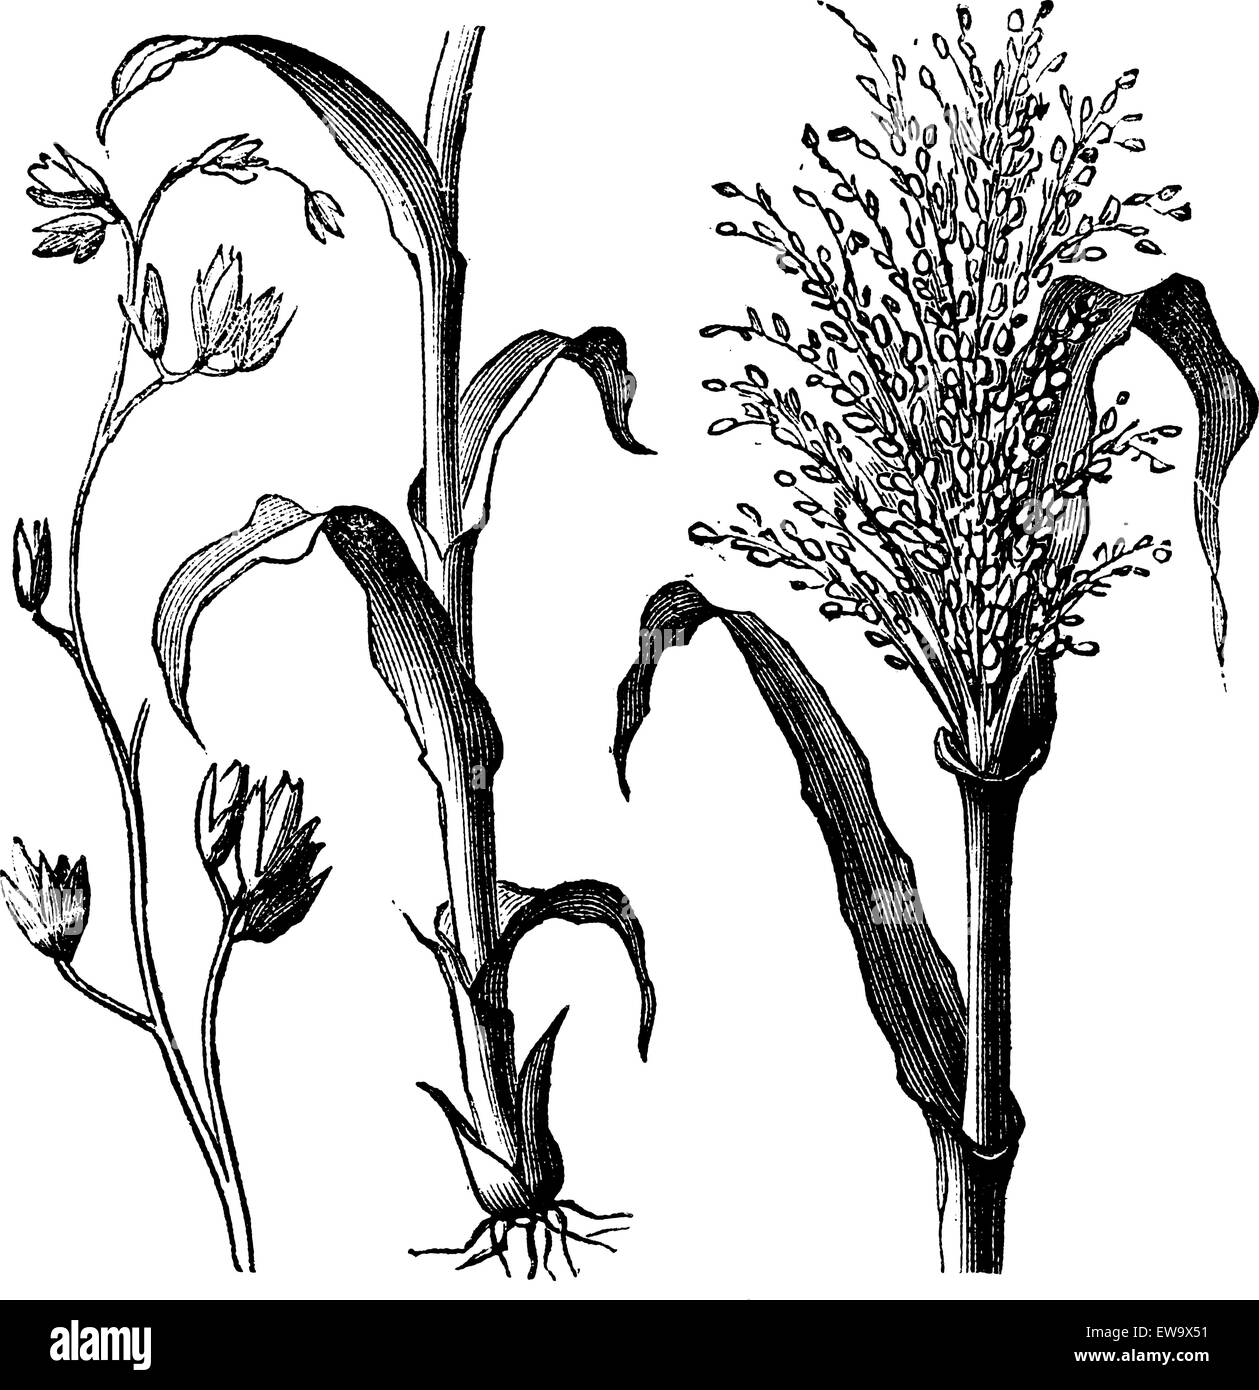 Andropogon virginicus, yellowsedge bluestem or broomsedge bluestem old vintage engraving. Vector engraved illustration from 1890. Stock Vector